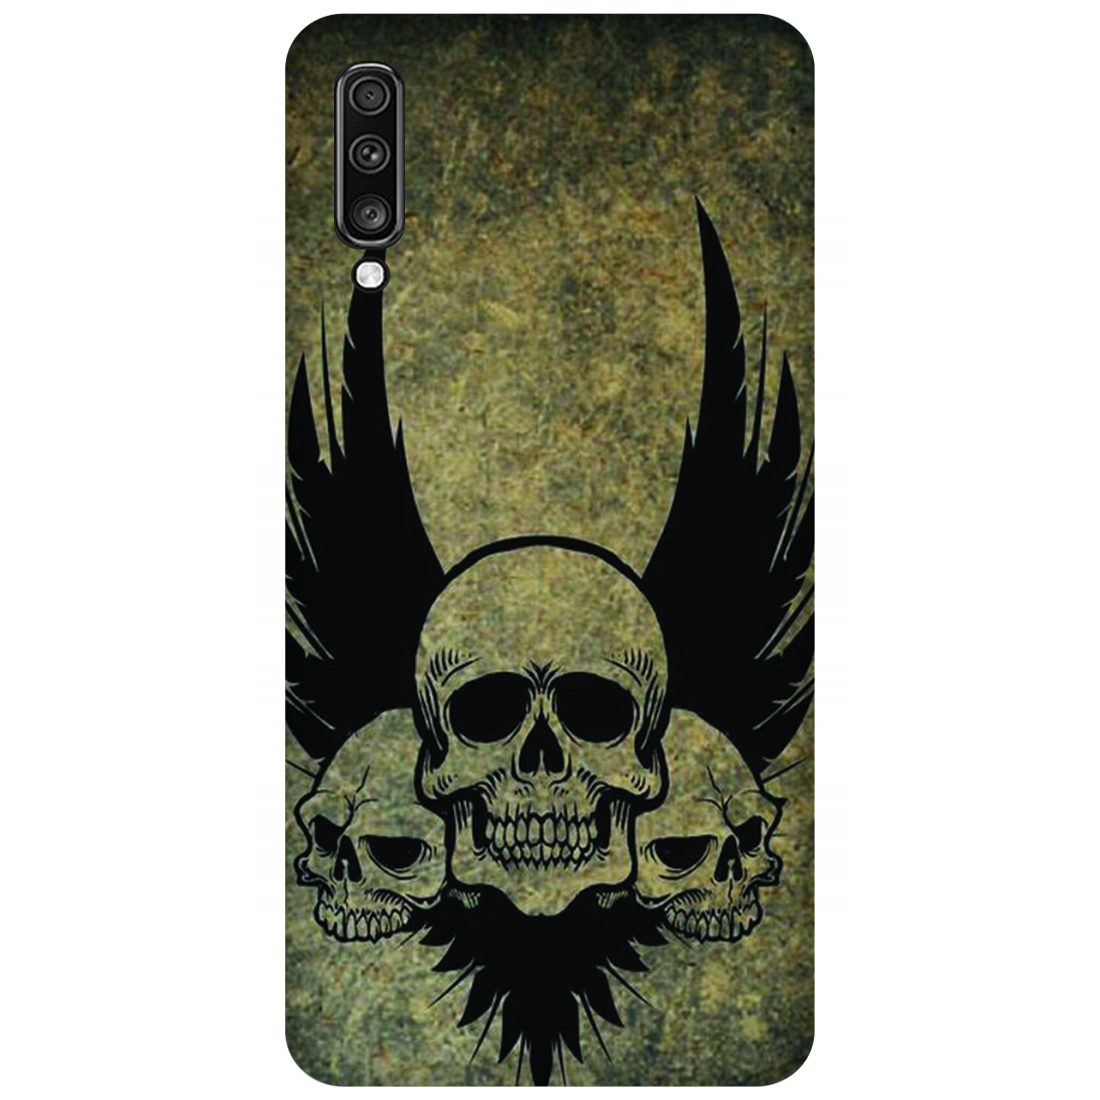 Menacing Skulls with Dark Wings on a Grungy Background Case Samsung Galaxy A70